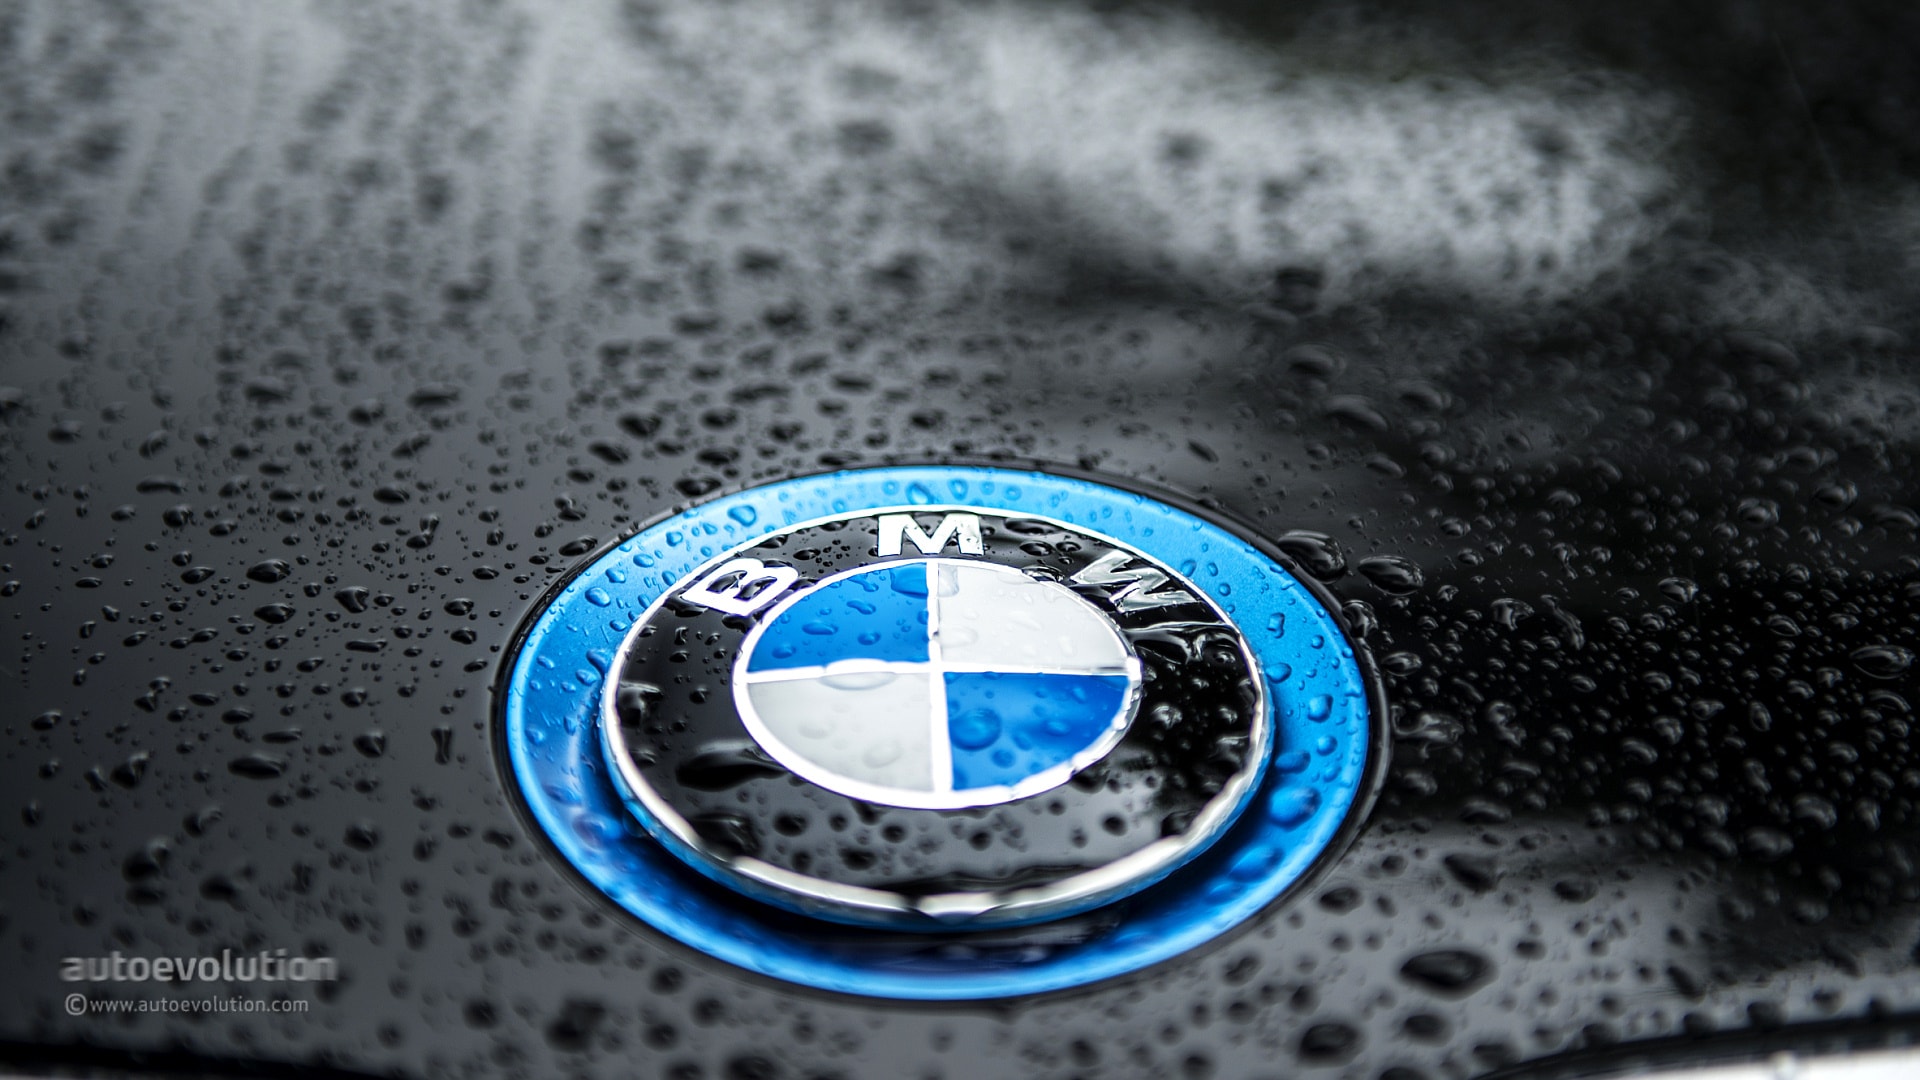 New BMW Logo Won't Be Used on Cars - New Roundel Not for Vehicles